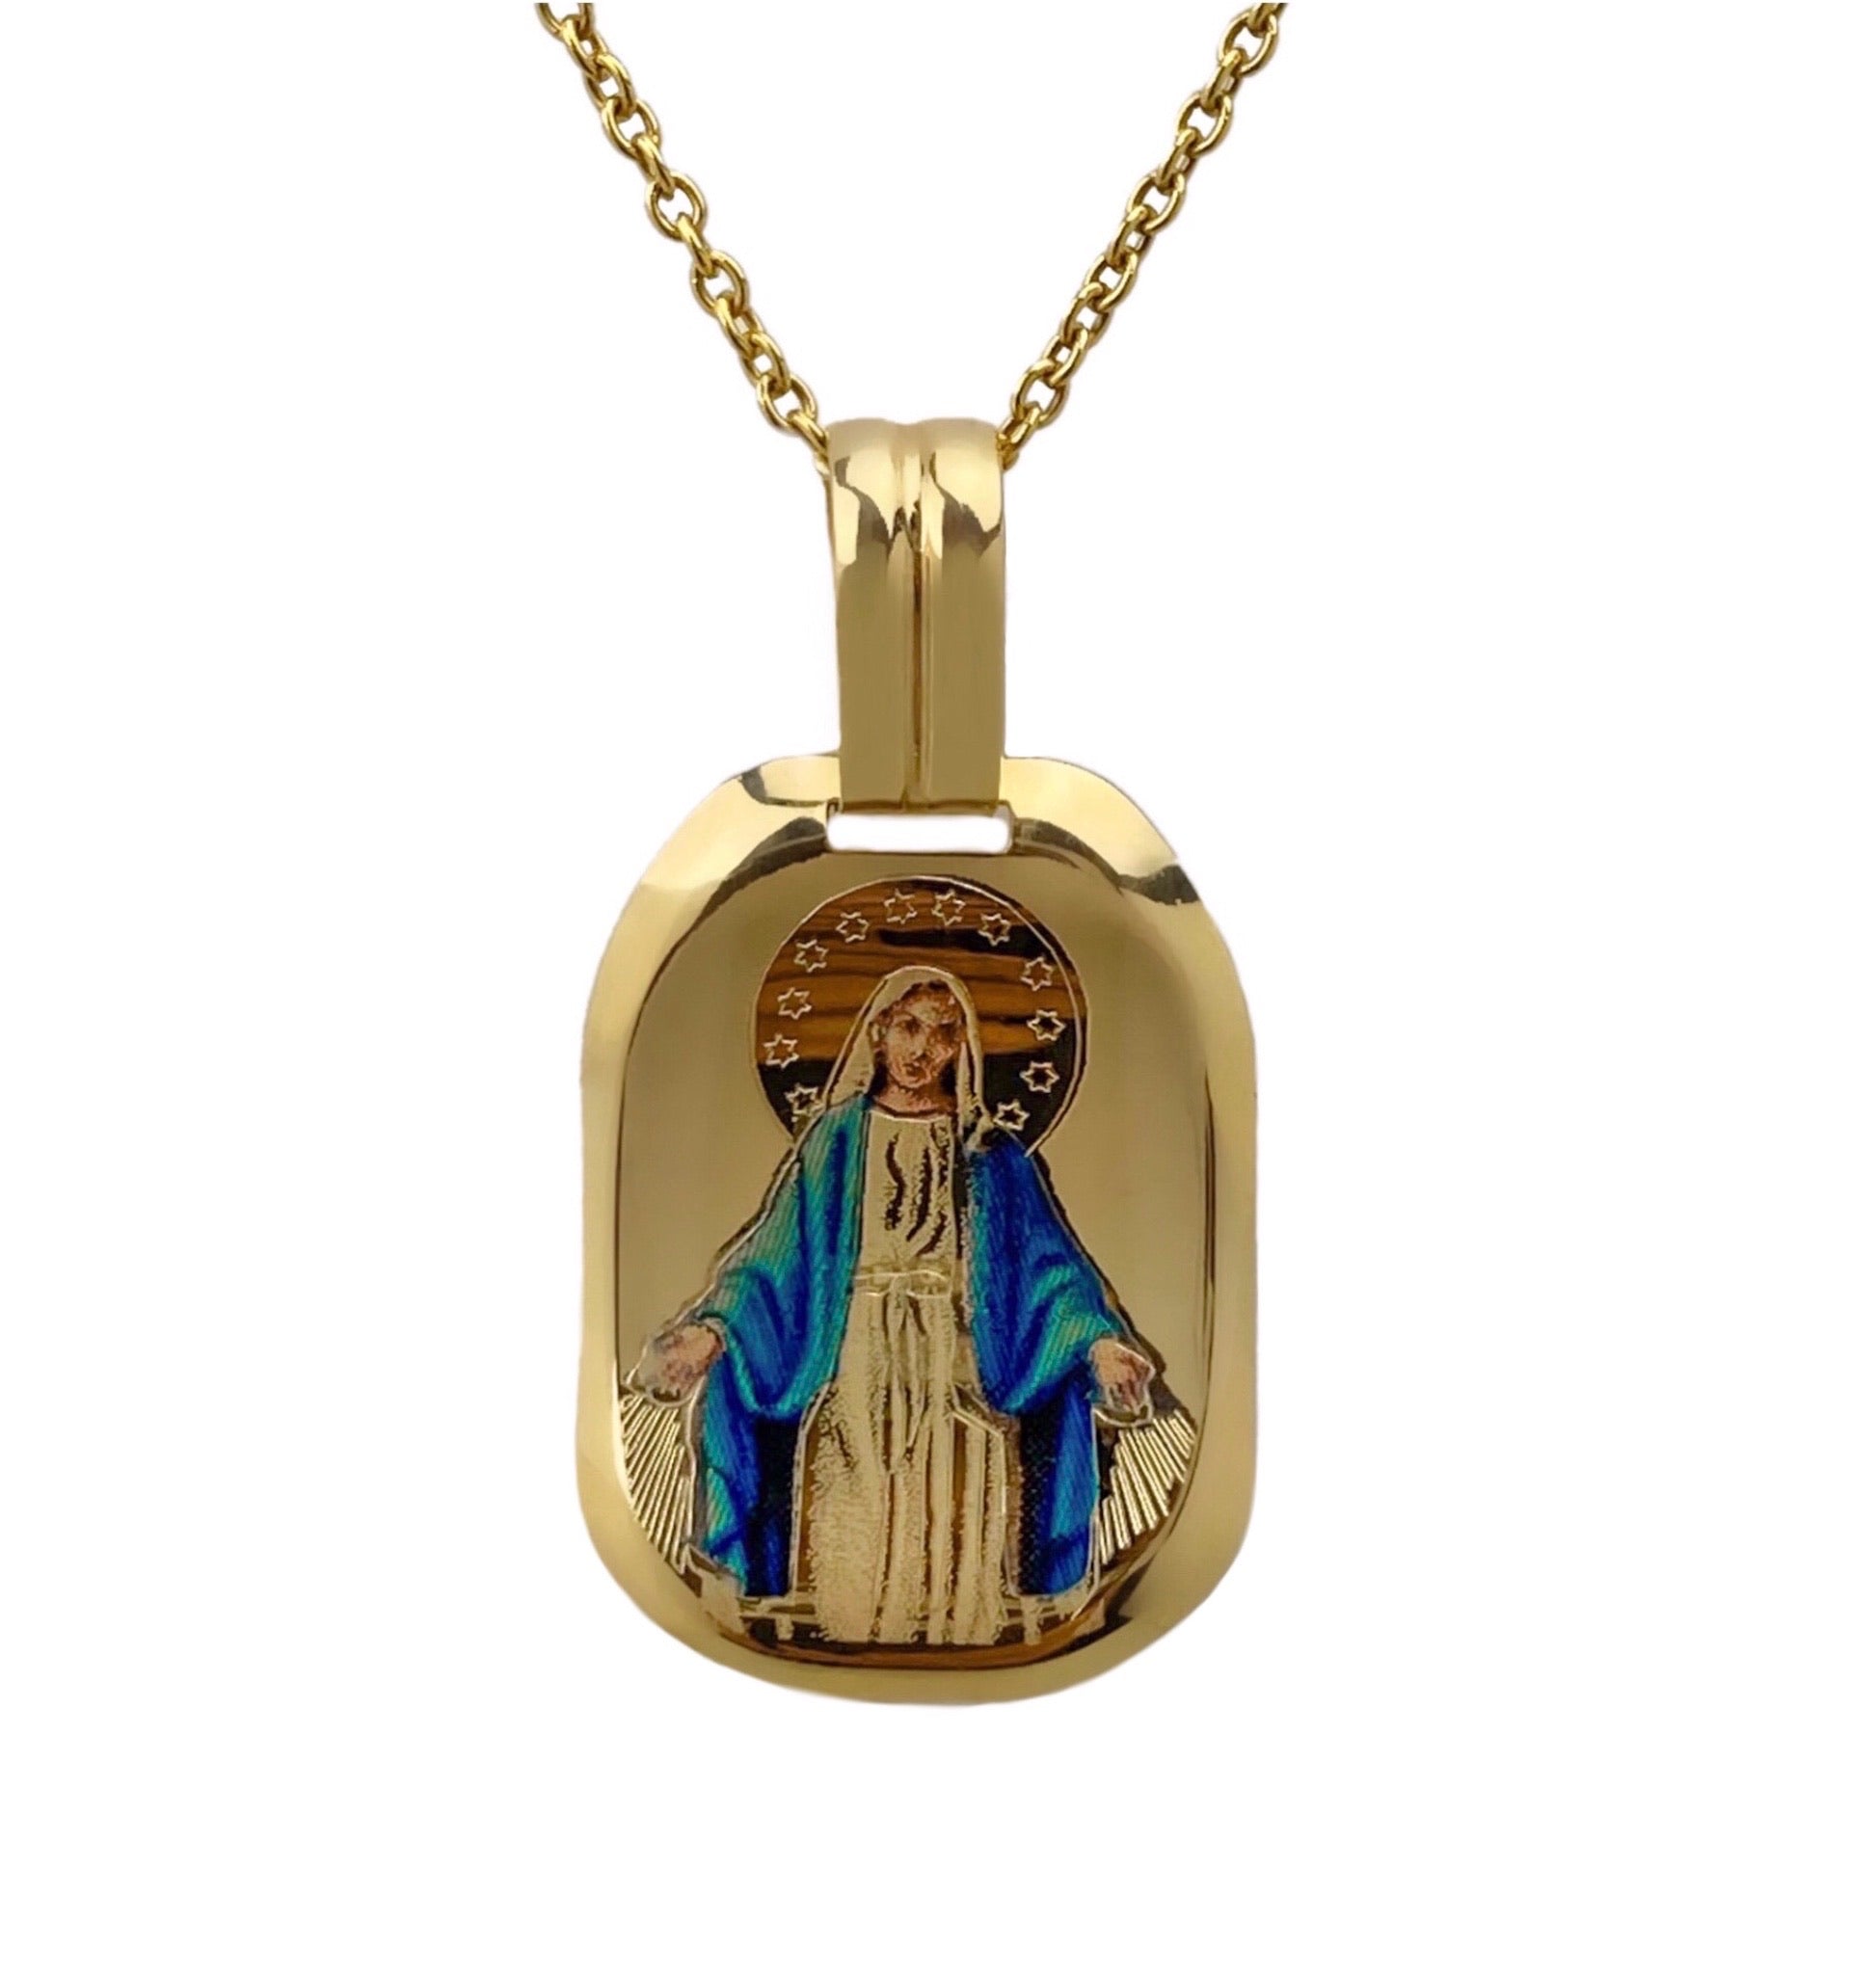 14K YELLOW GOLD PAINTED VIRGEN MILAGROSA NECKLACE